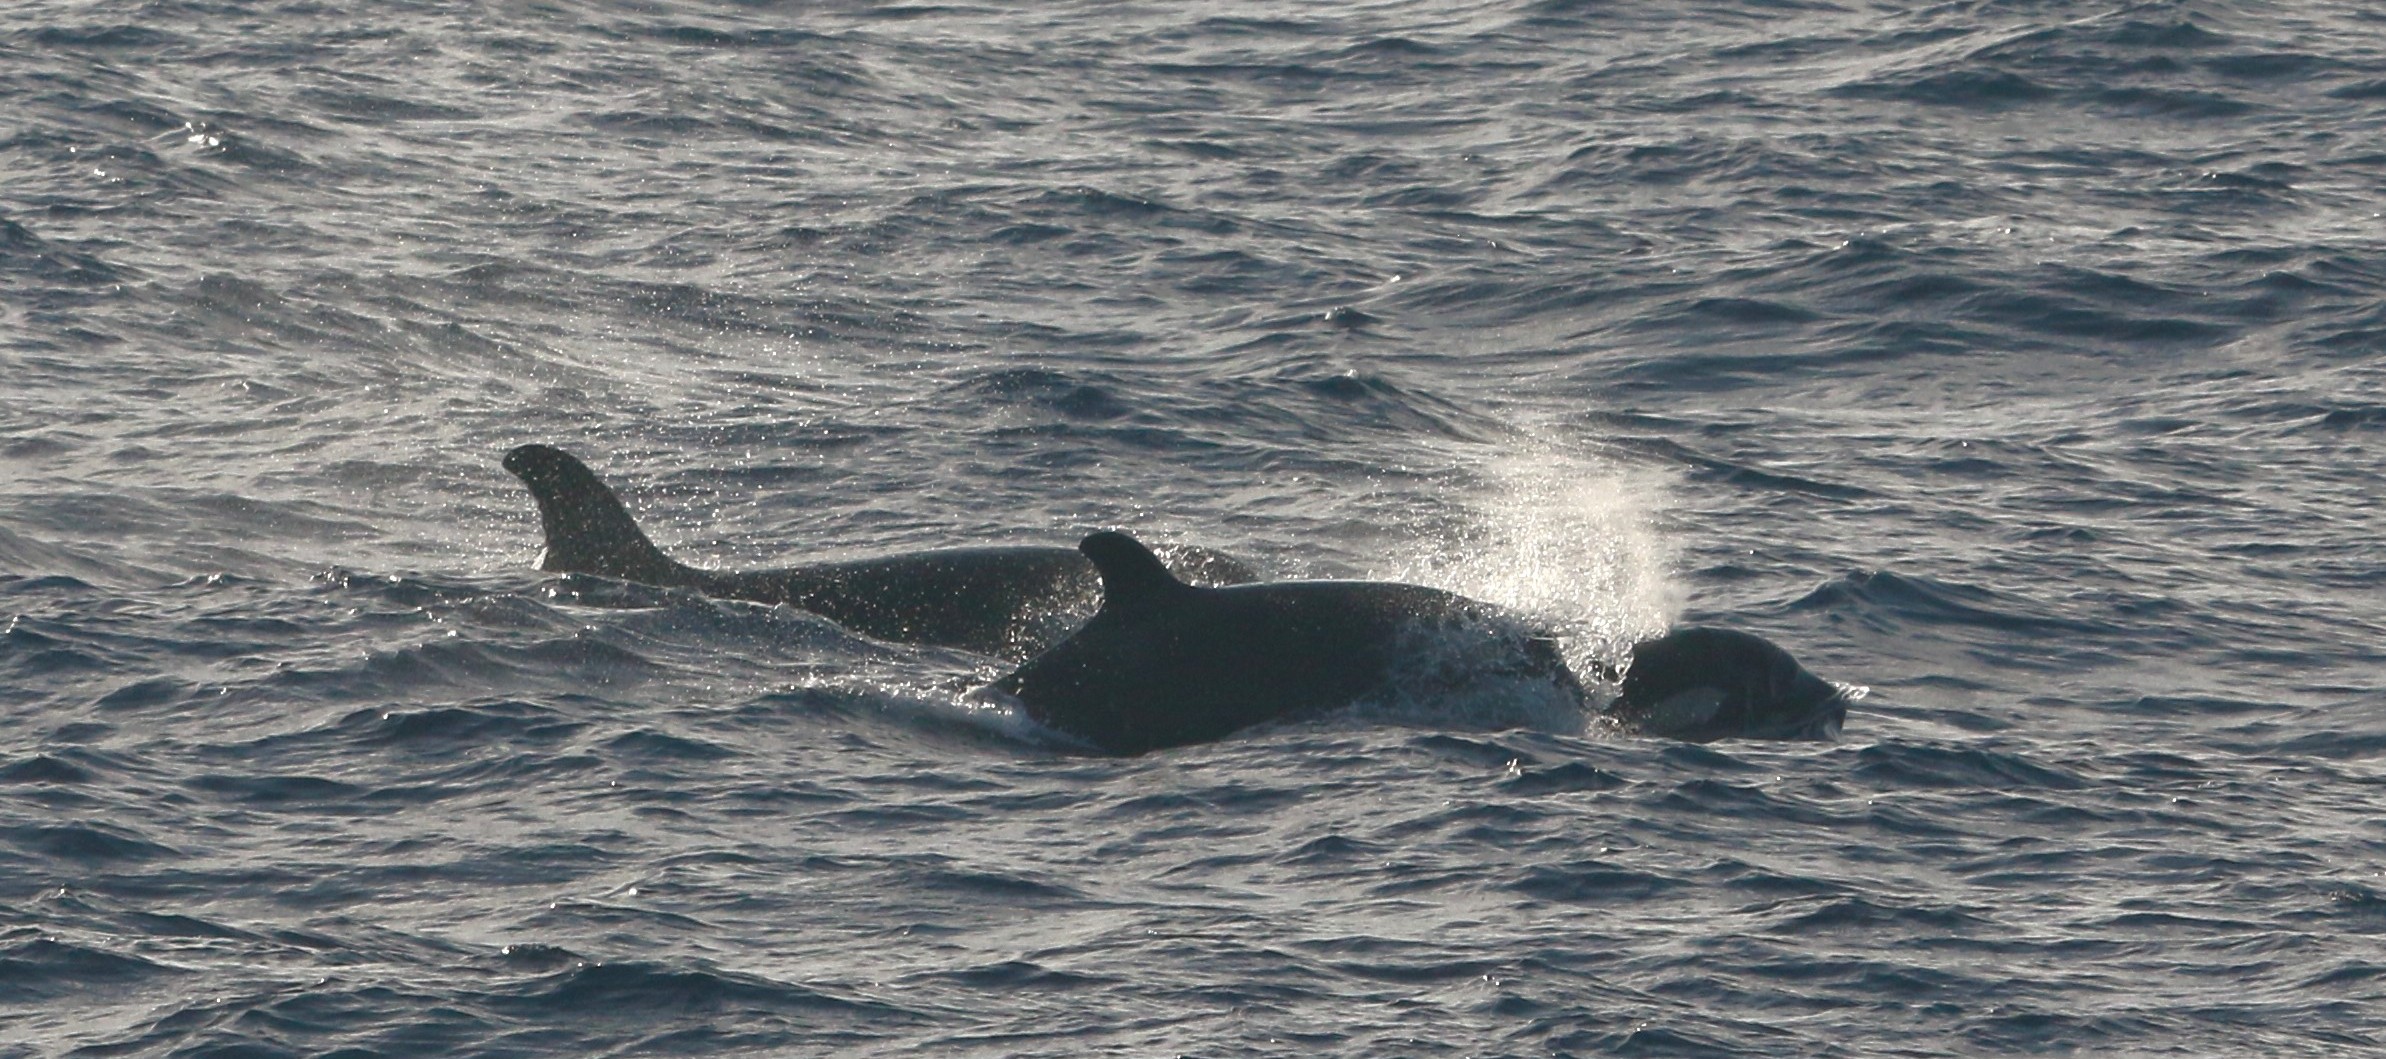 PICRC partners with Whaleology to record whales and dolphins around Palau